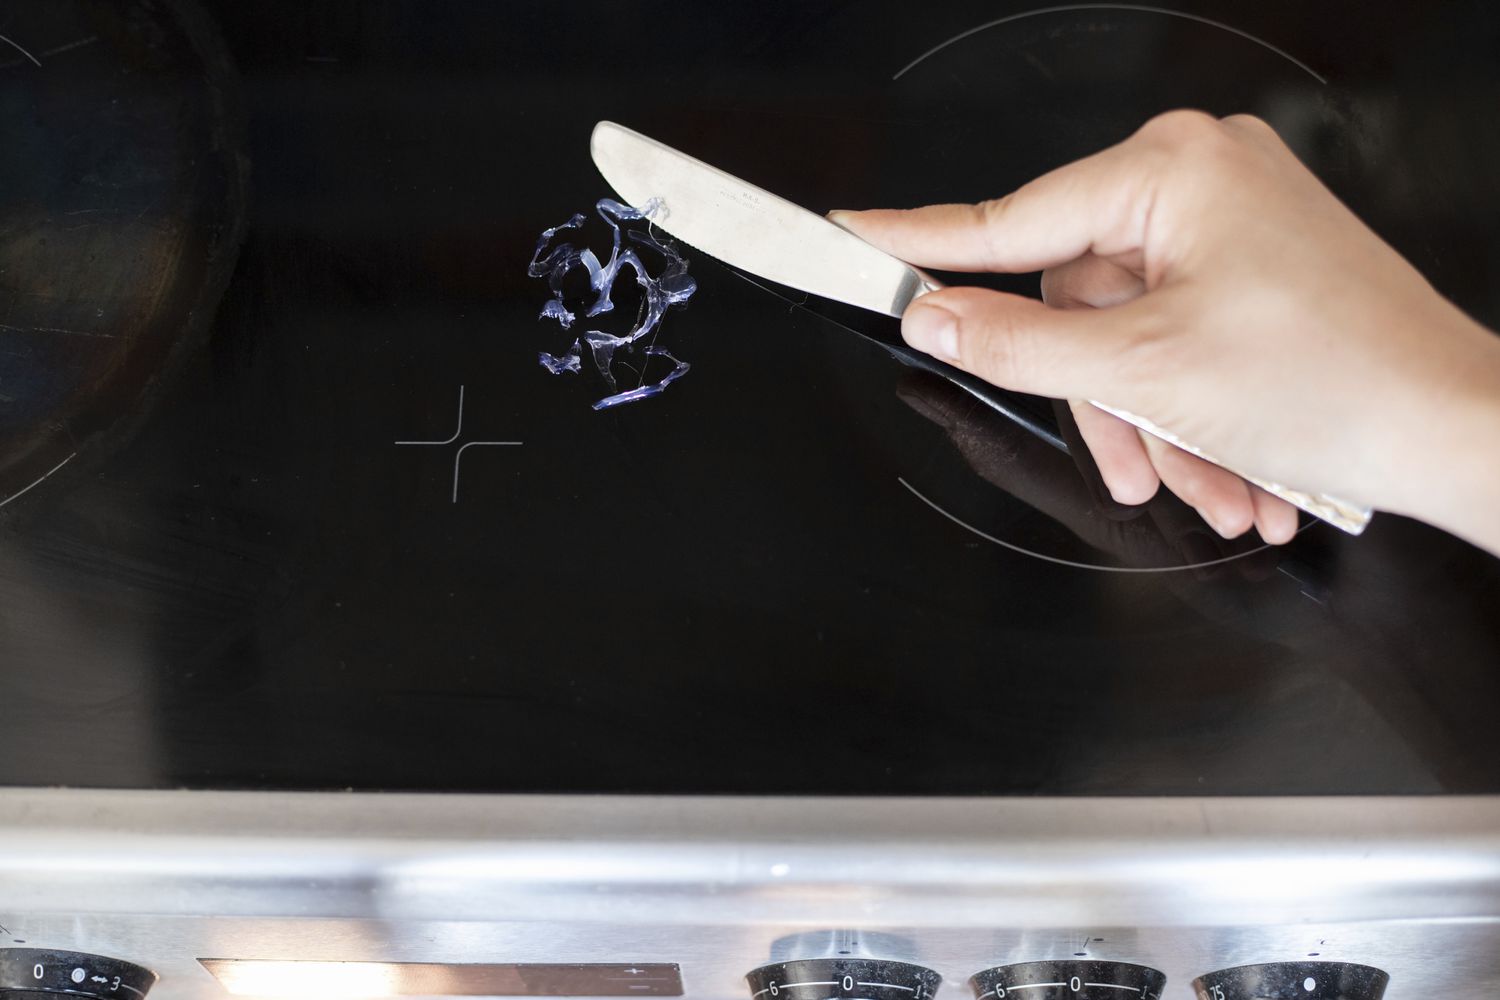 How To Remove Melted Plastic From Glass Cooktop